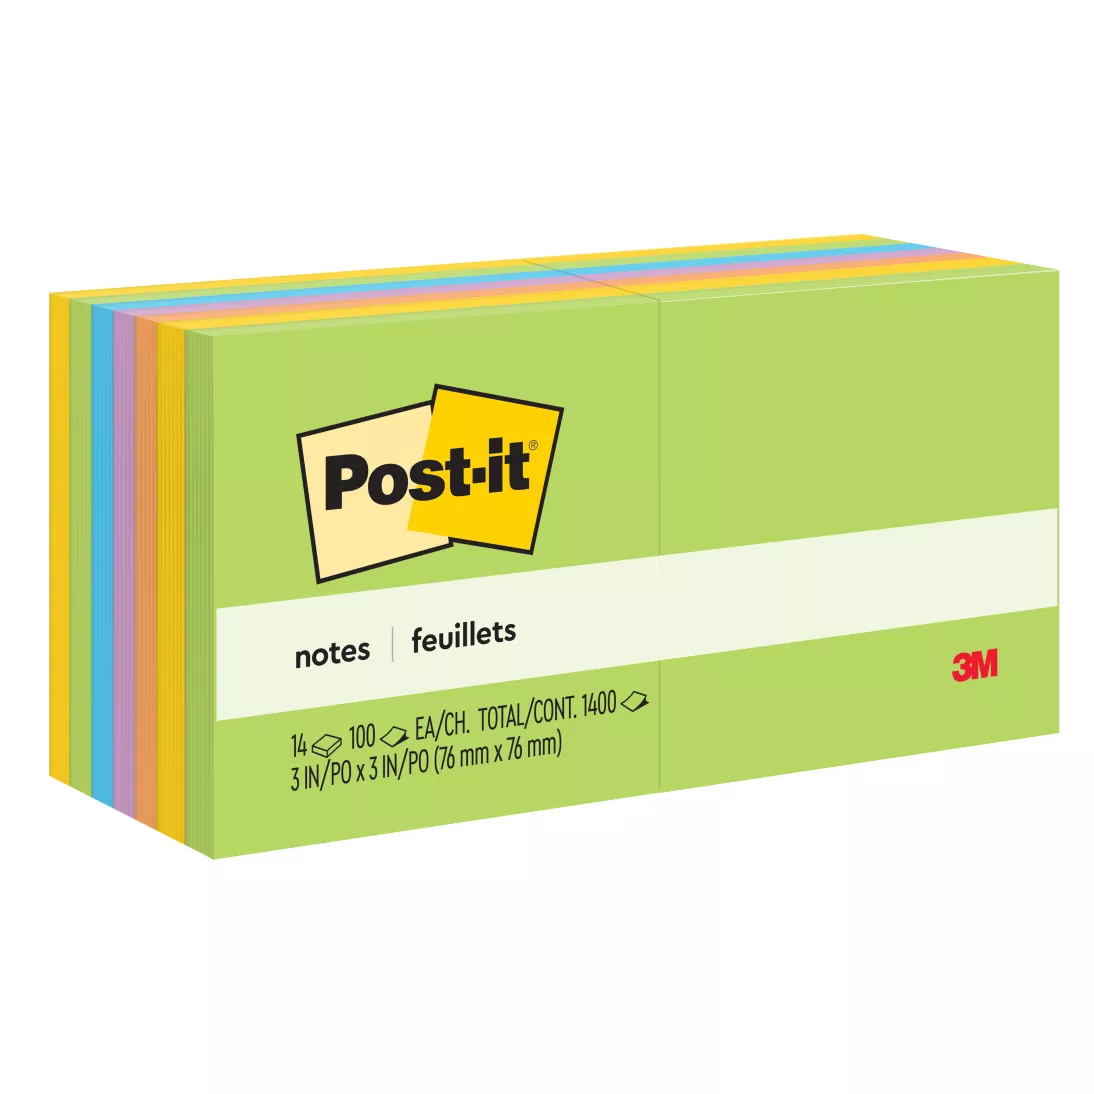 Post-it® Notes, 654-14AU, 3 in x 3 in (76 mm x 76 mm), Jaipur colors, 14
Pads/Pack